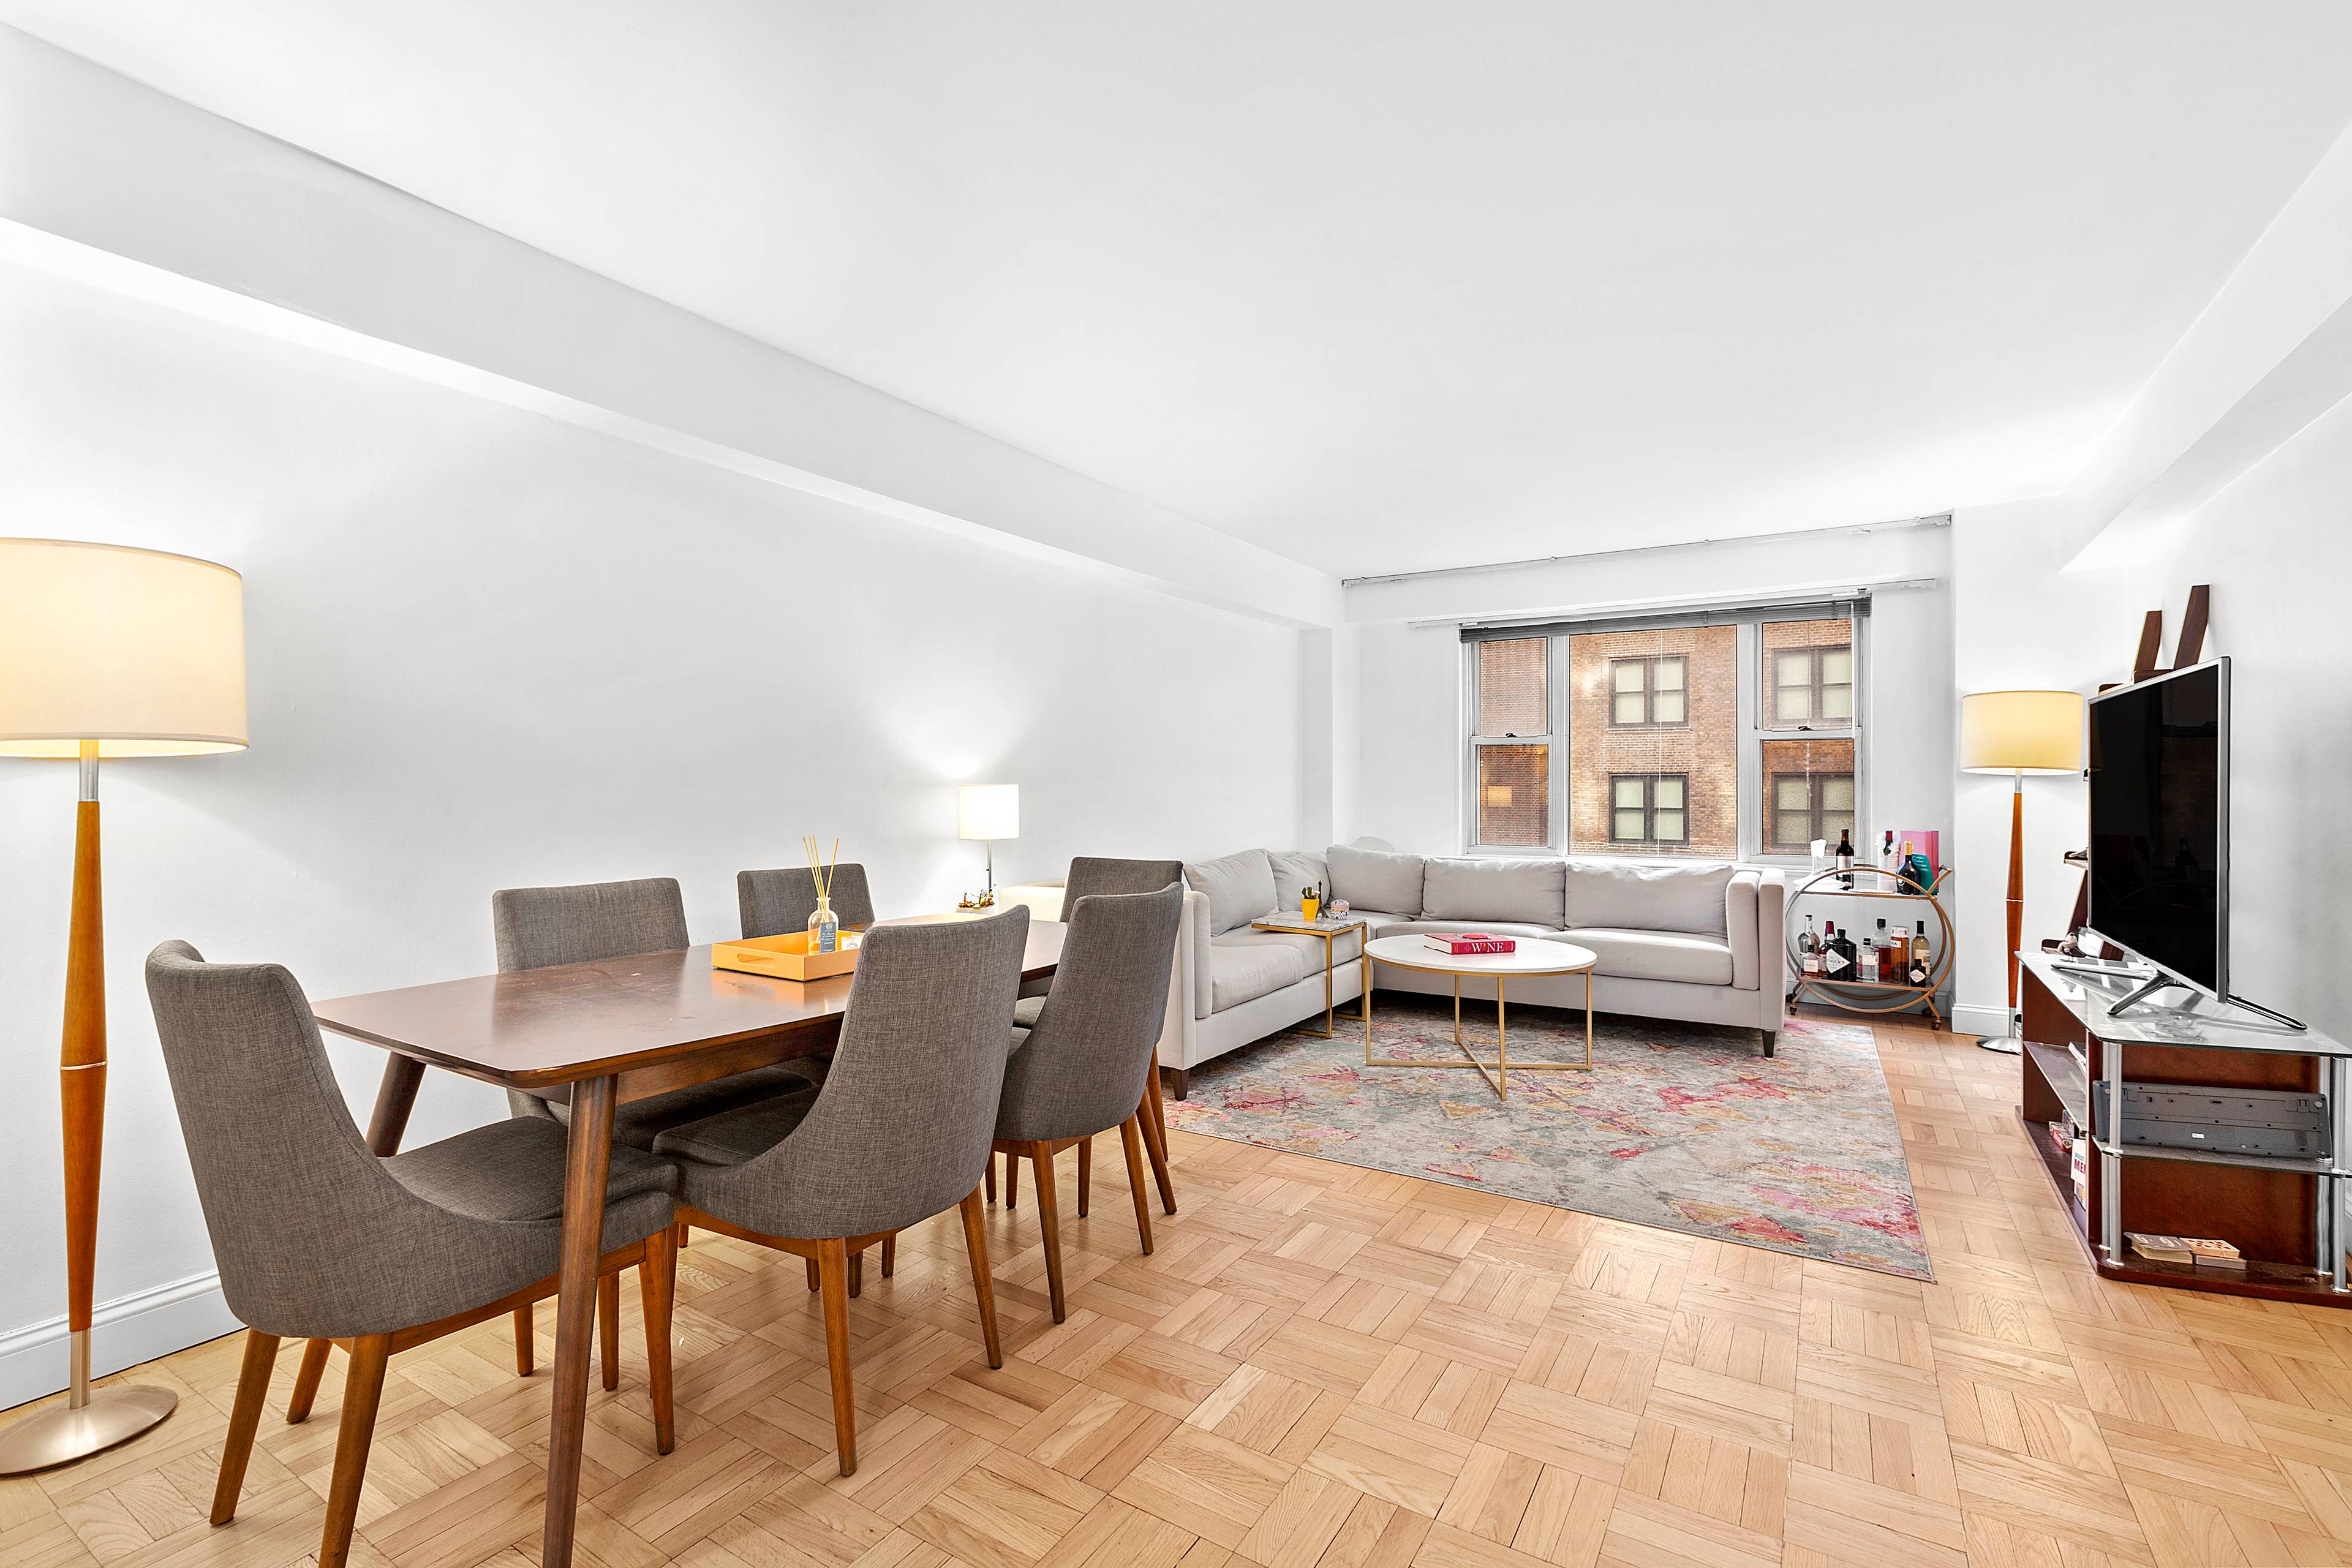 Welcome to Residence 6J at 310 Lexington Avenue in the heart of Murray Hill.